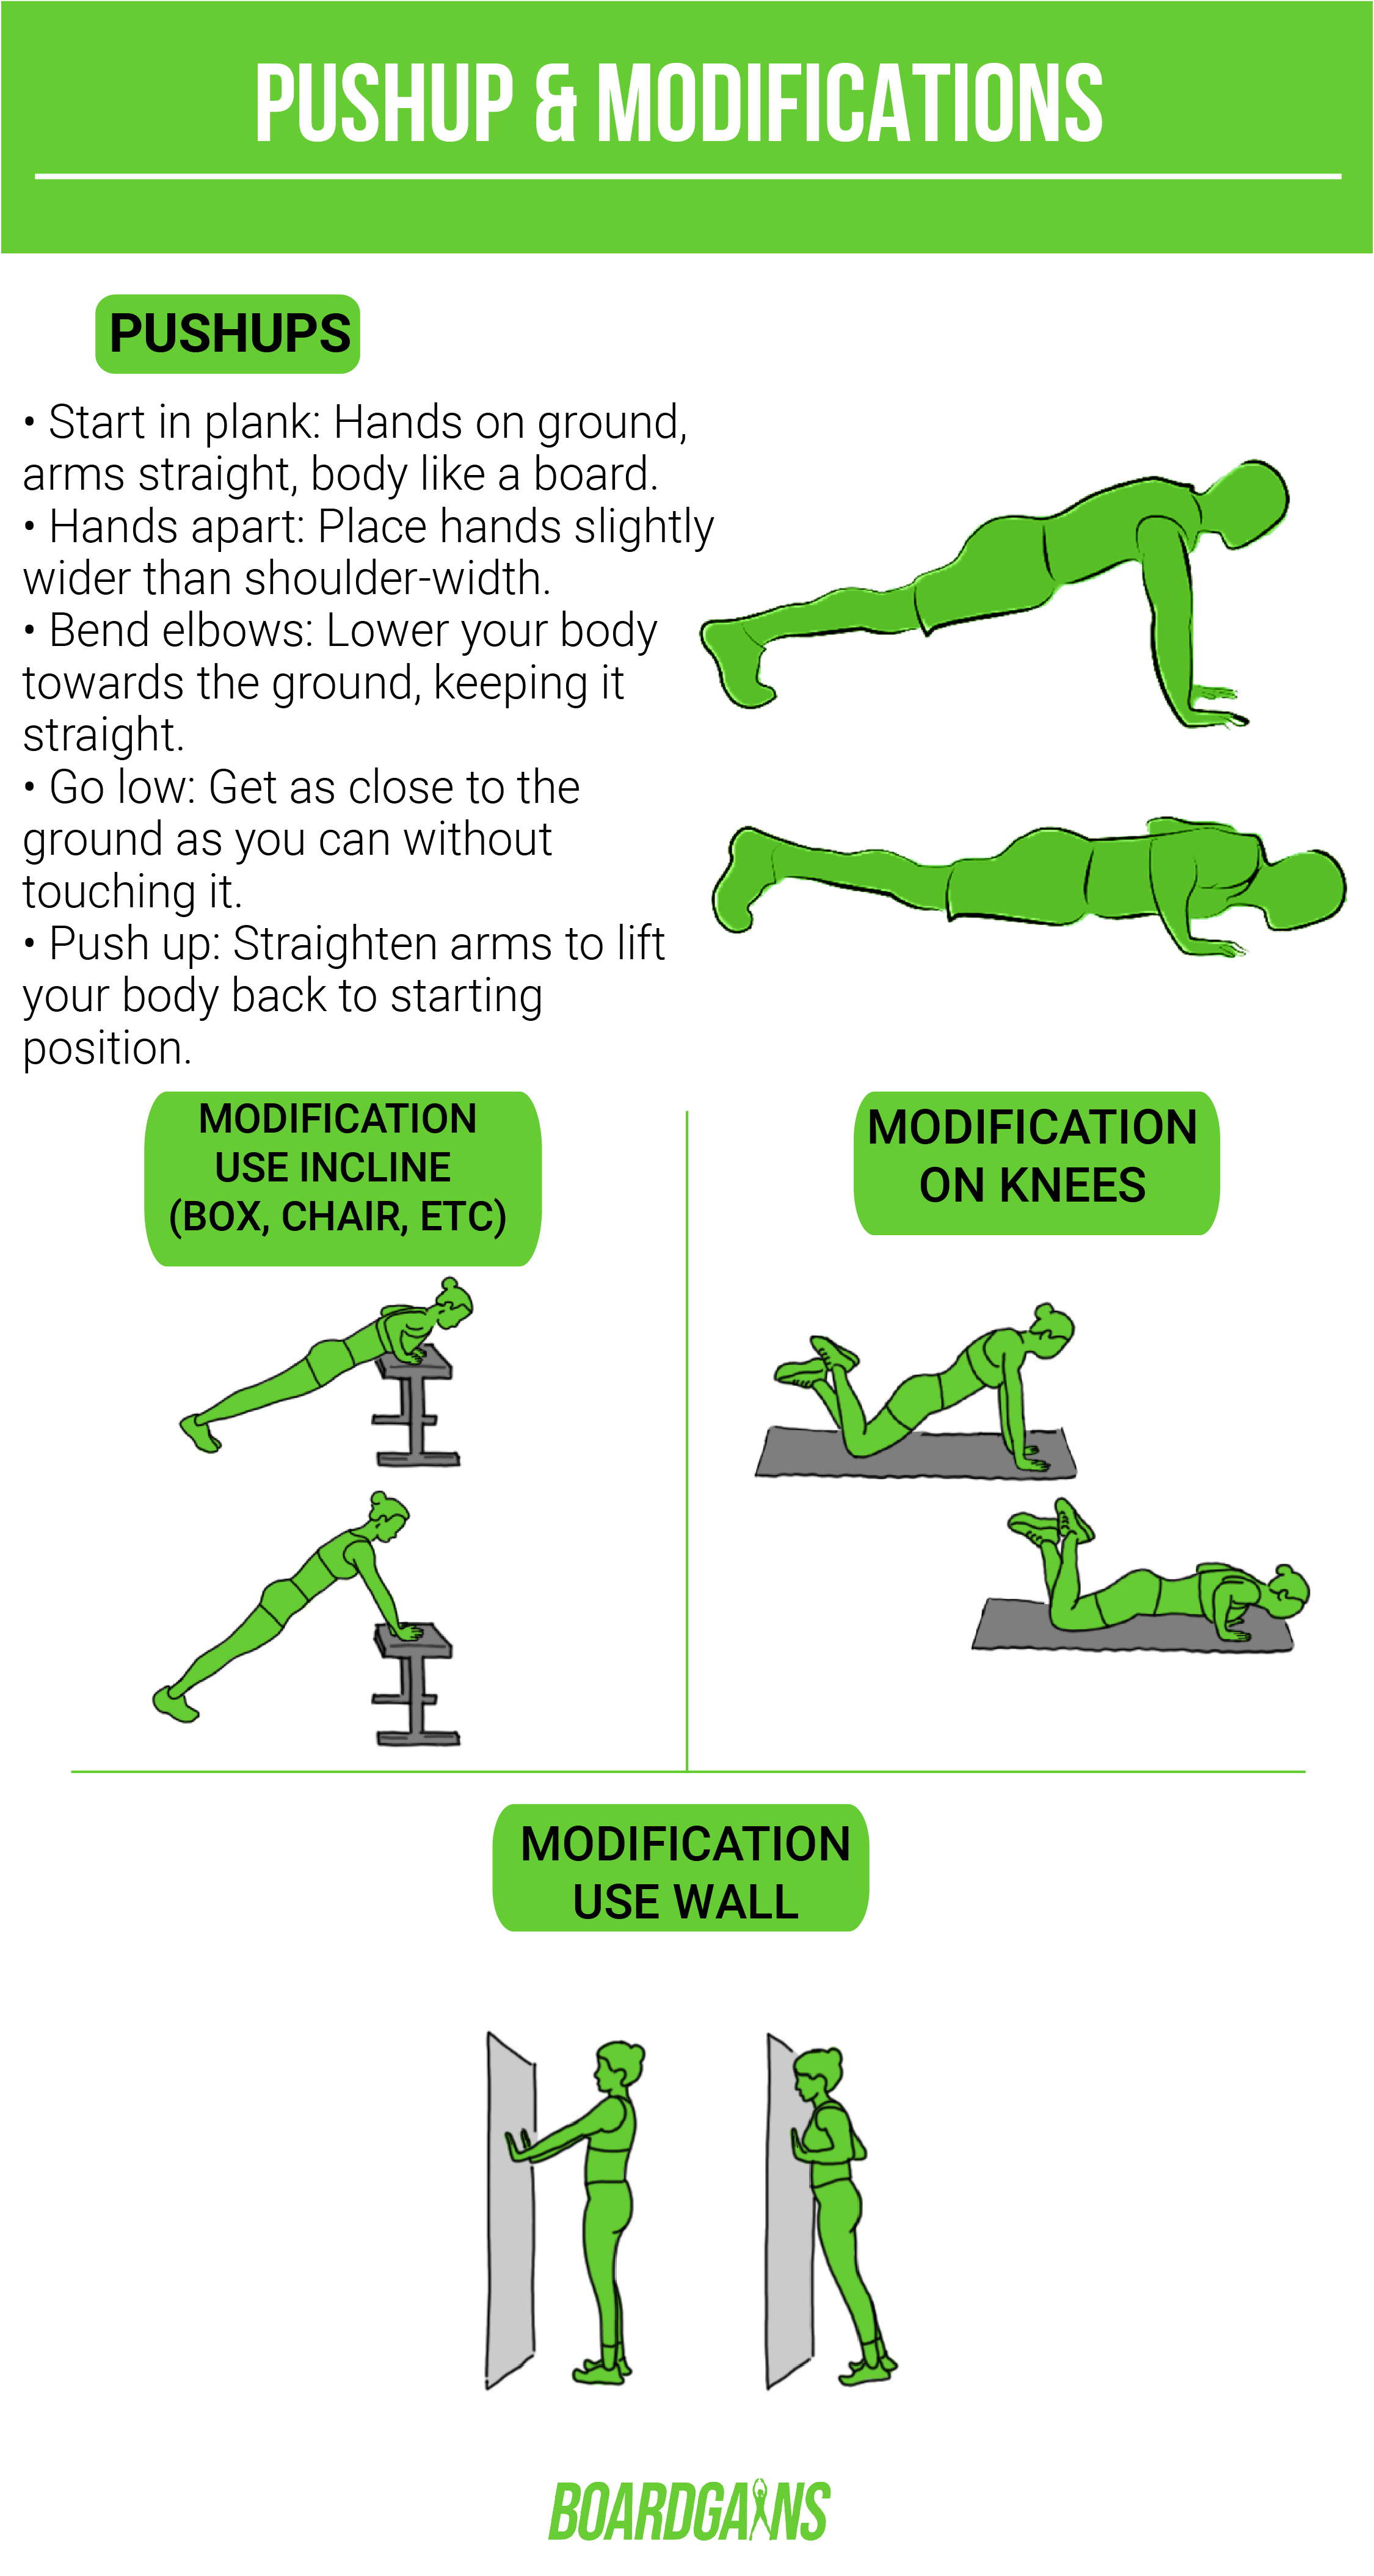 Watch: A Modified Push-Up and Plank Workout to Build Chest